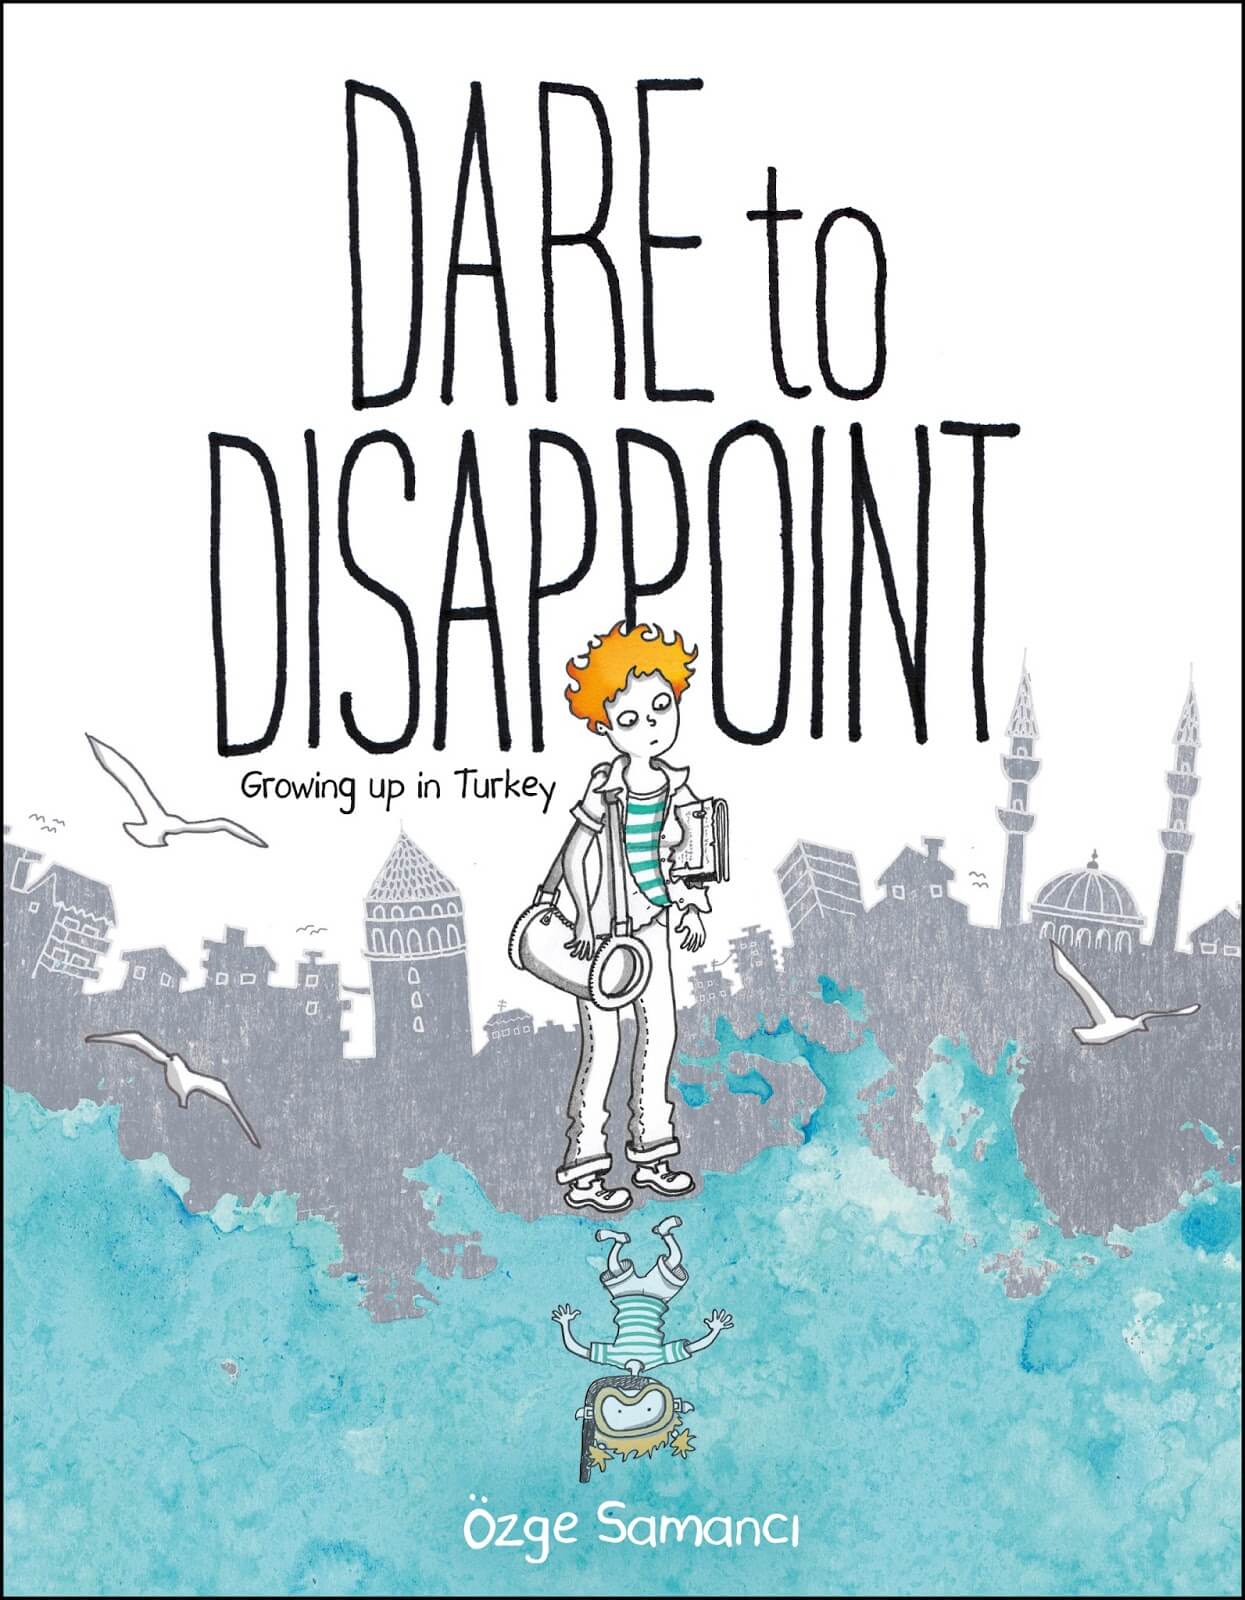 Cover of Ozge Samanci's graphic novel "Dare to disappoint. Growing up in Turkey" (published by Farrar, Straus and Giroux)